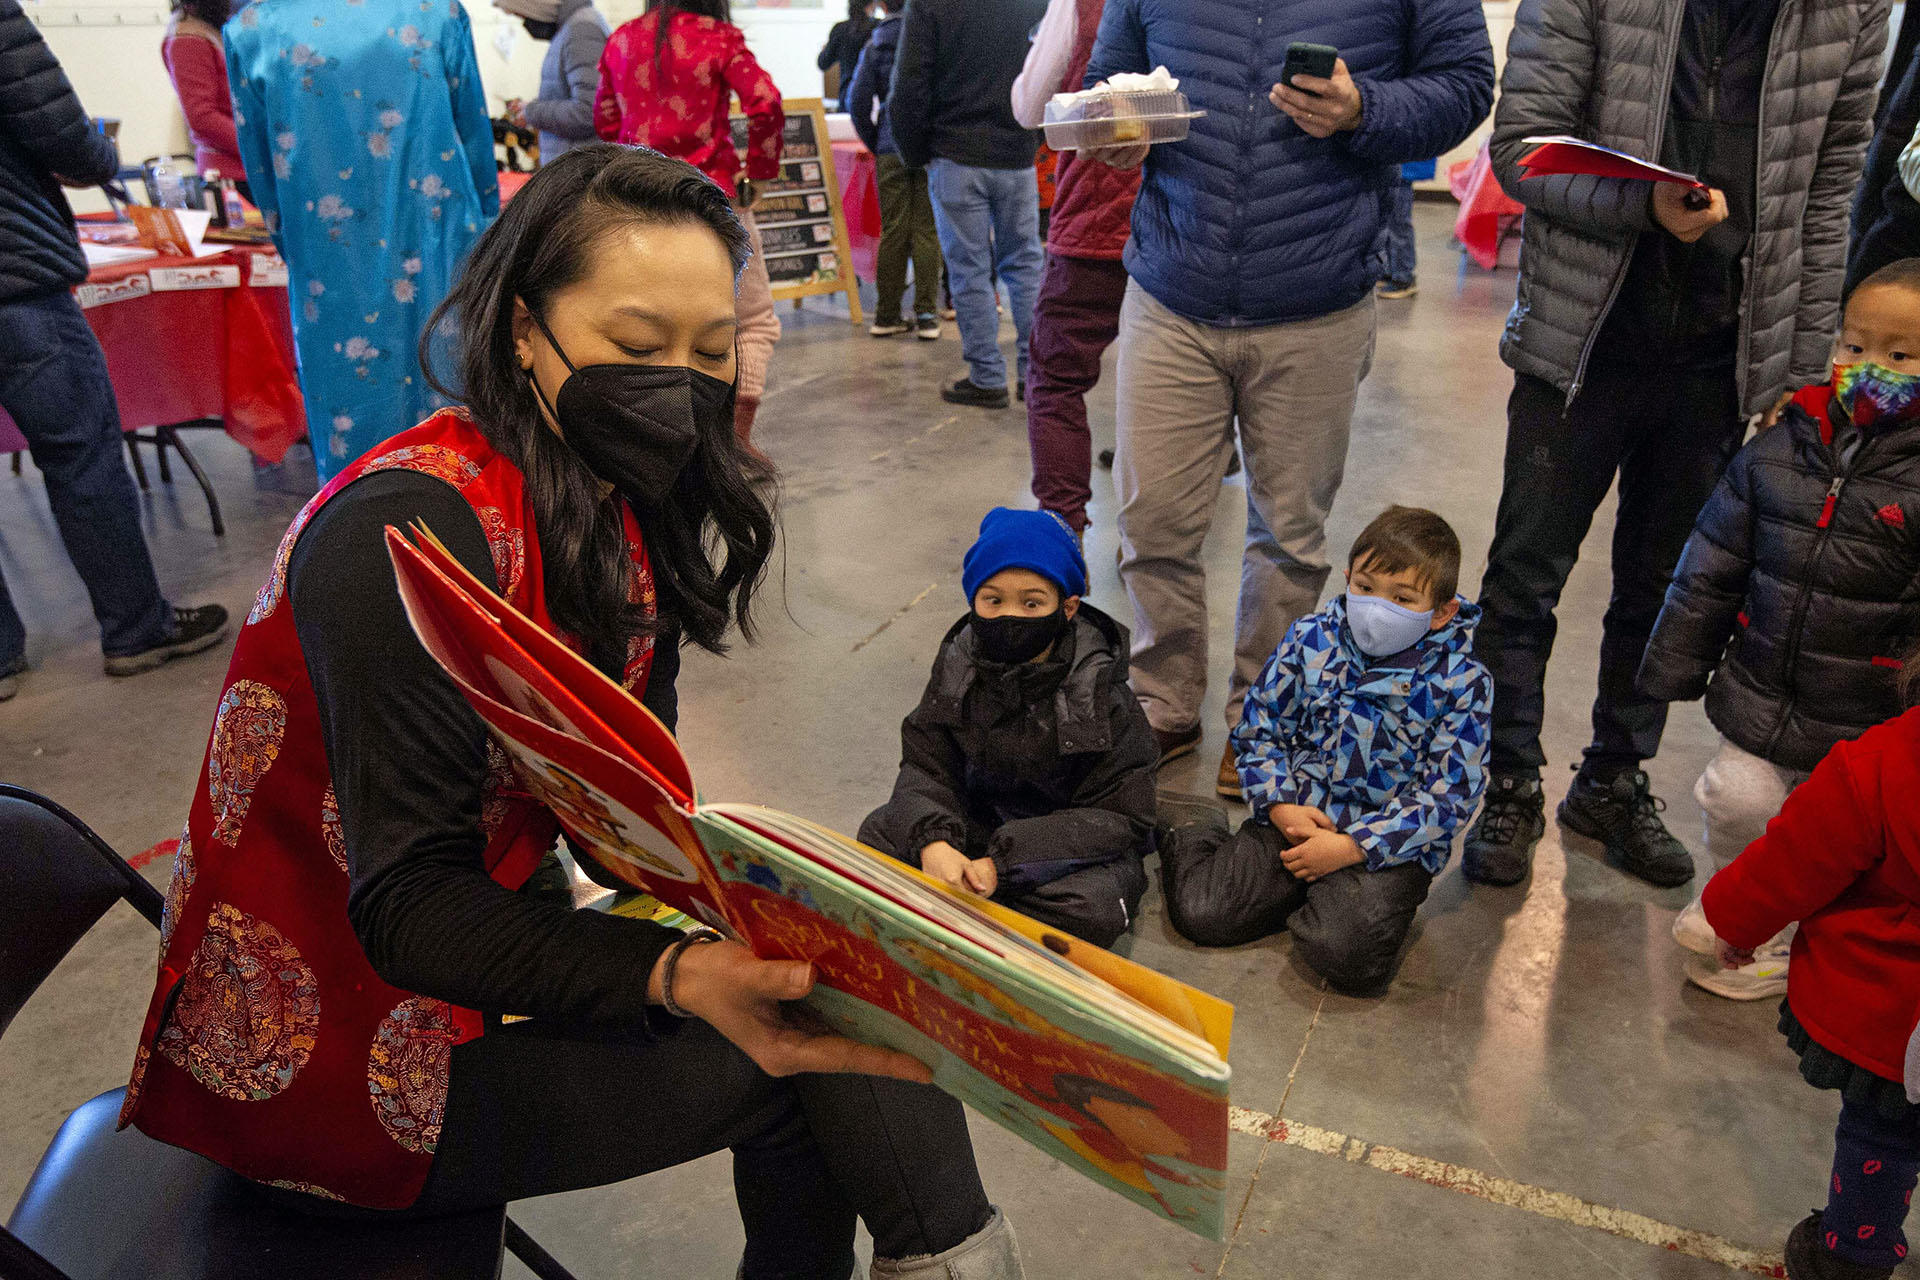 Regina Shih reads a story to children during the Lunar New Year Celebration at Legacy Park in Decatur on Saturday, Jan. 29. 2022. Photo by Dean Hesse.